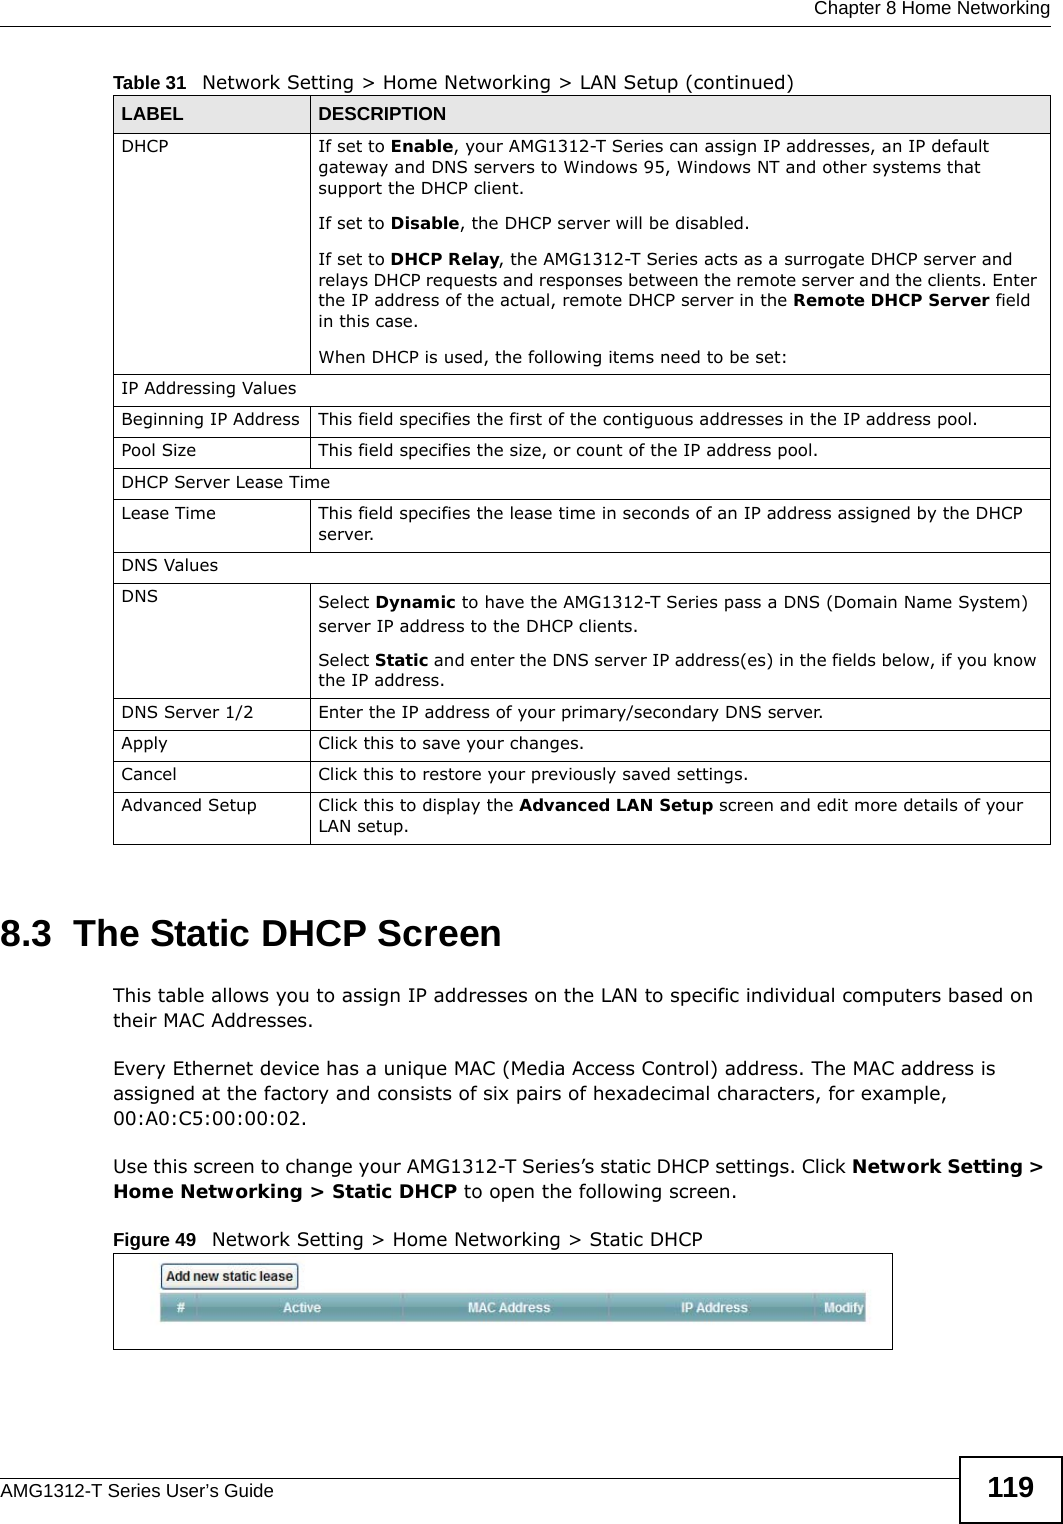  Chapter 8 Home NetworkingAMG1312-T Series User’s Guide 1198.3  The Static DHCP ScreenThis table allows you to assign IP addresses on the LAN to specific individual computers based on their MAC Addresses. Every Ethernet device has a unique MAC (Media Access Control) address. The MAC address is assigned at the factory and consists of six pairs of hexadecimal characters, for example, 00:A0:C5:00:00:02.Use this screen to change your AMG1312-T Series’s static DHCP settings. Click Network Setting &gt; Home Networking &gt; Static DHCP to open the following screen.Figure 49   Network Setting &gt; Home Networking &gt; Static DHCP DHCP If set to Enable, your AMG1312-T Series can assign IP addresses, an IP default gateway and DNS servers to Windows 95, Windows NT and other systems that support the DHCP client.If set to Disable, the DHCP server will be disabled. If set to DHCP Relay, the AMG1312-T Series acts as a surrogate DHCP server and relays DHCP requests and responses between the remote server and the clients. Enter the IP address of the actual, remote DHCP server in the Remote DHCP Server field in this case. When DHCP is used, the following items need to be set: IP Addressing ValuesBeginning IP Address This field specifies the first of the contiguous addresses in the IP address pool.Pool Size This field specifies the size, or count of the IP address pool.DHCP Server Lease TimeLease Time This field specifies the lease time in seconds of an IP address assigned by the DHCP server.DNS ValuesDNS Select Dynamic to have the AMG1312-T Series pass a DNS (Domain Name System) server IP address to the DHCP clients.Select Static and enter the DNS server IP address(es) in the fields below, if you know the IP address.DNS Server 1/2 Enter the IP address of your primary/secondary DNS server.Apply Click this to save your changes.Cancel Click this to restore your previously saved settings.Advanced Setup Click this to display the Advanced LAN Setup screen and edit more details of your LAN setup.Table 31   Network Setting &gt; Home Networking &gt; LAN Setup (continued)LABEL DESCRIPTION